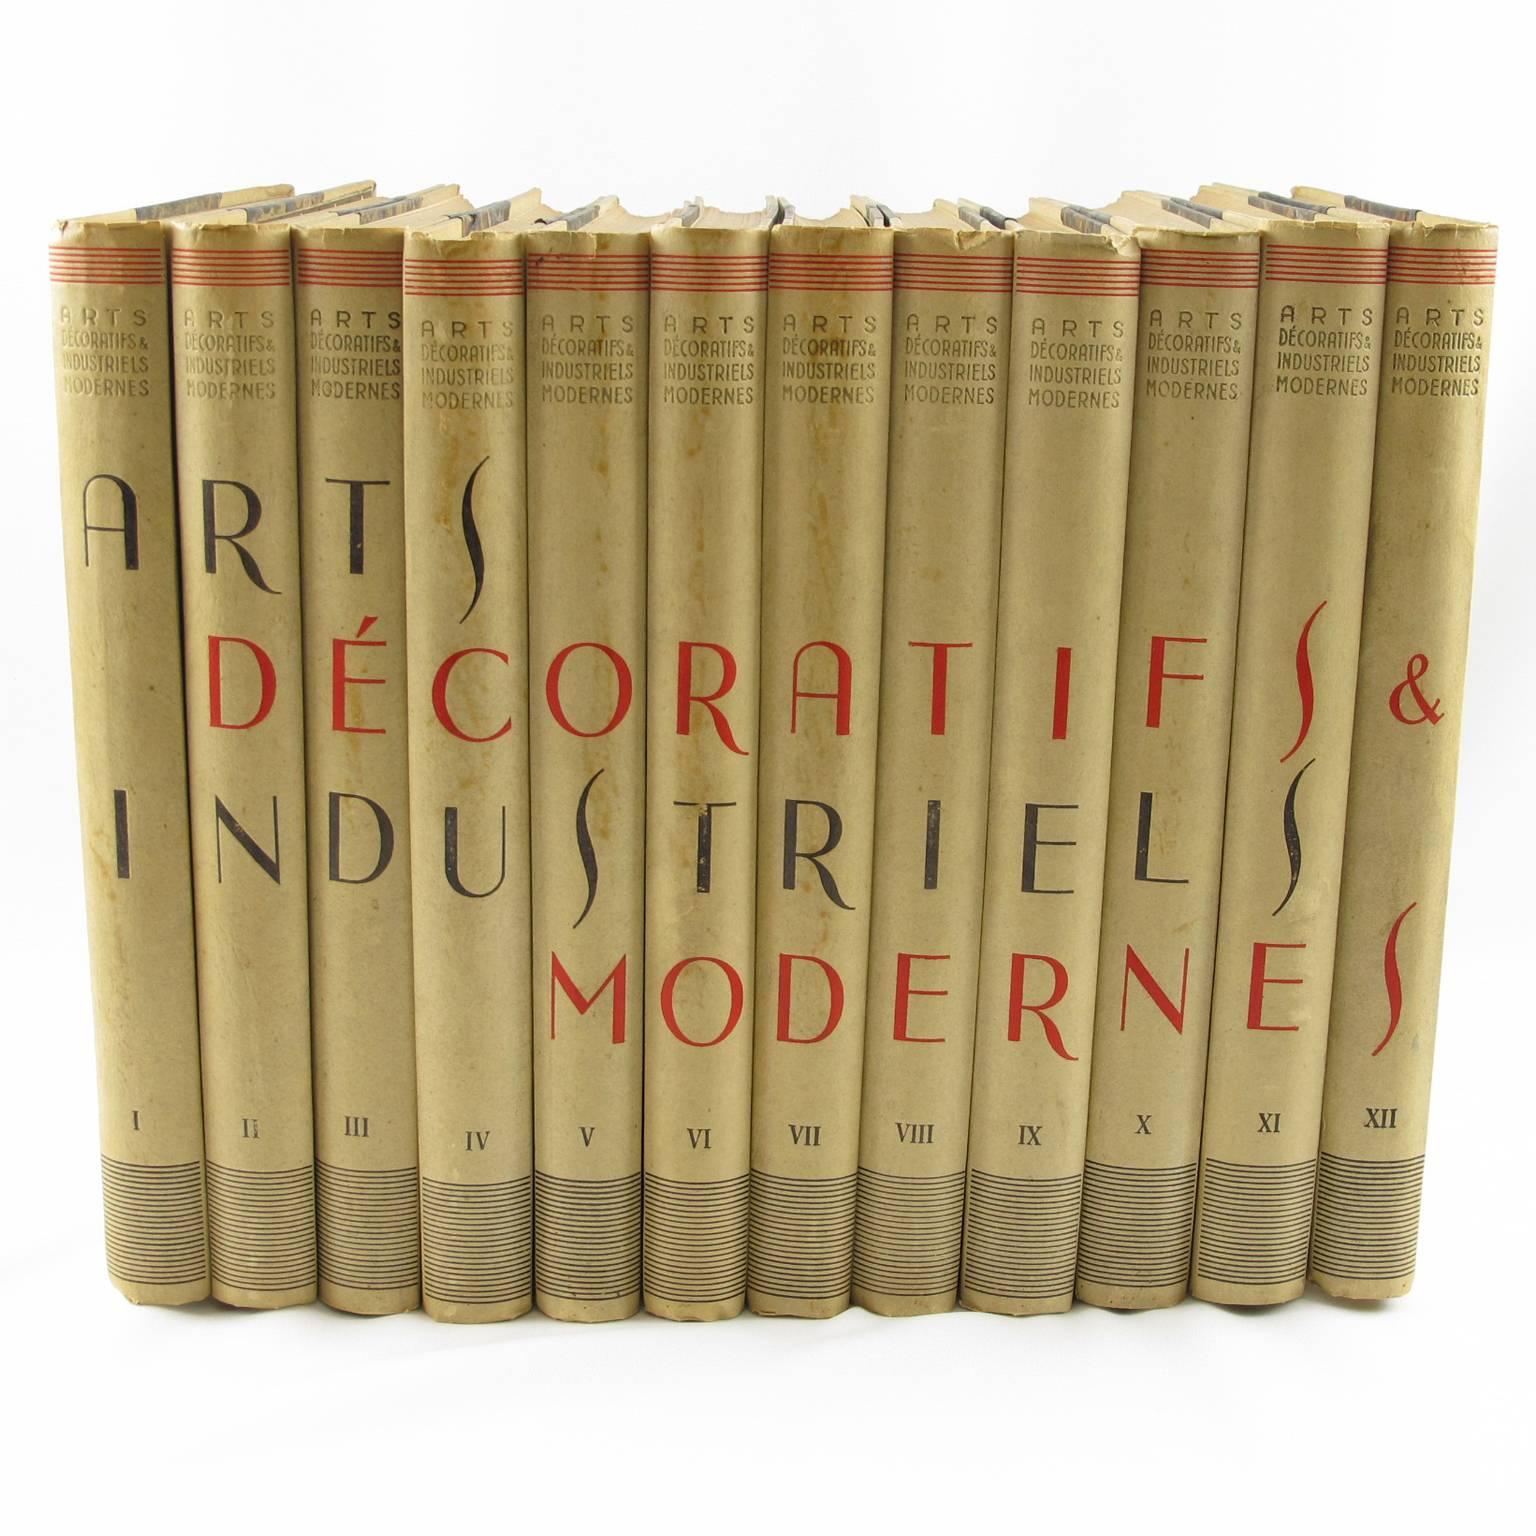 Rare the 'Encyclopedie des Arts Decoratifs et Industriels Modernes' (Encyclopedia of Modern Decorative and Industrial Arts in the twentieth century) complete set of 12 original books, first edition of 1925.
Printed by French Government Printing